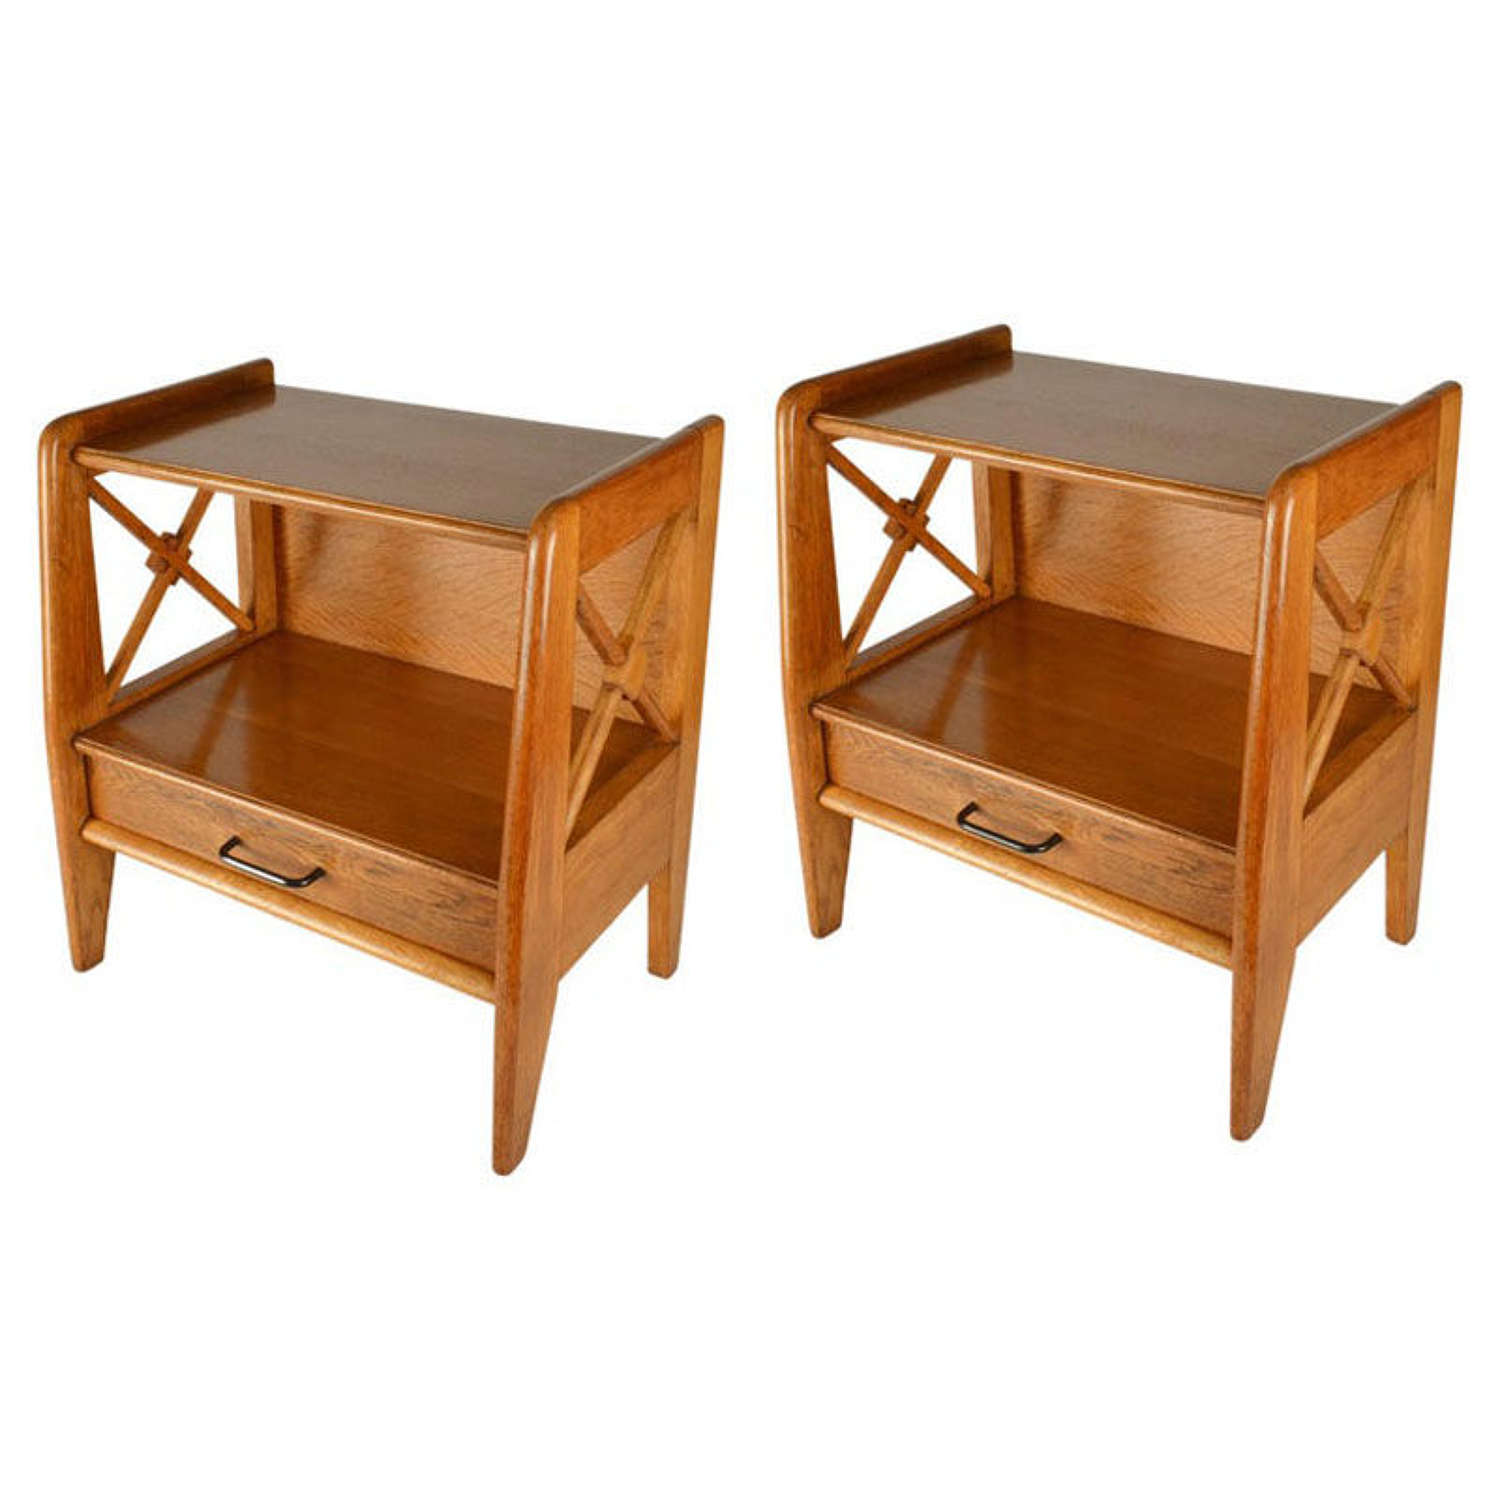 Pair of 1950's Oak Bed Side Tables by Jacques Adnet